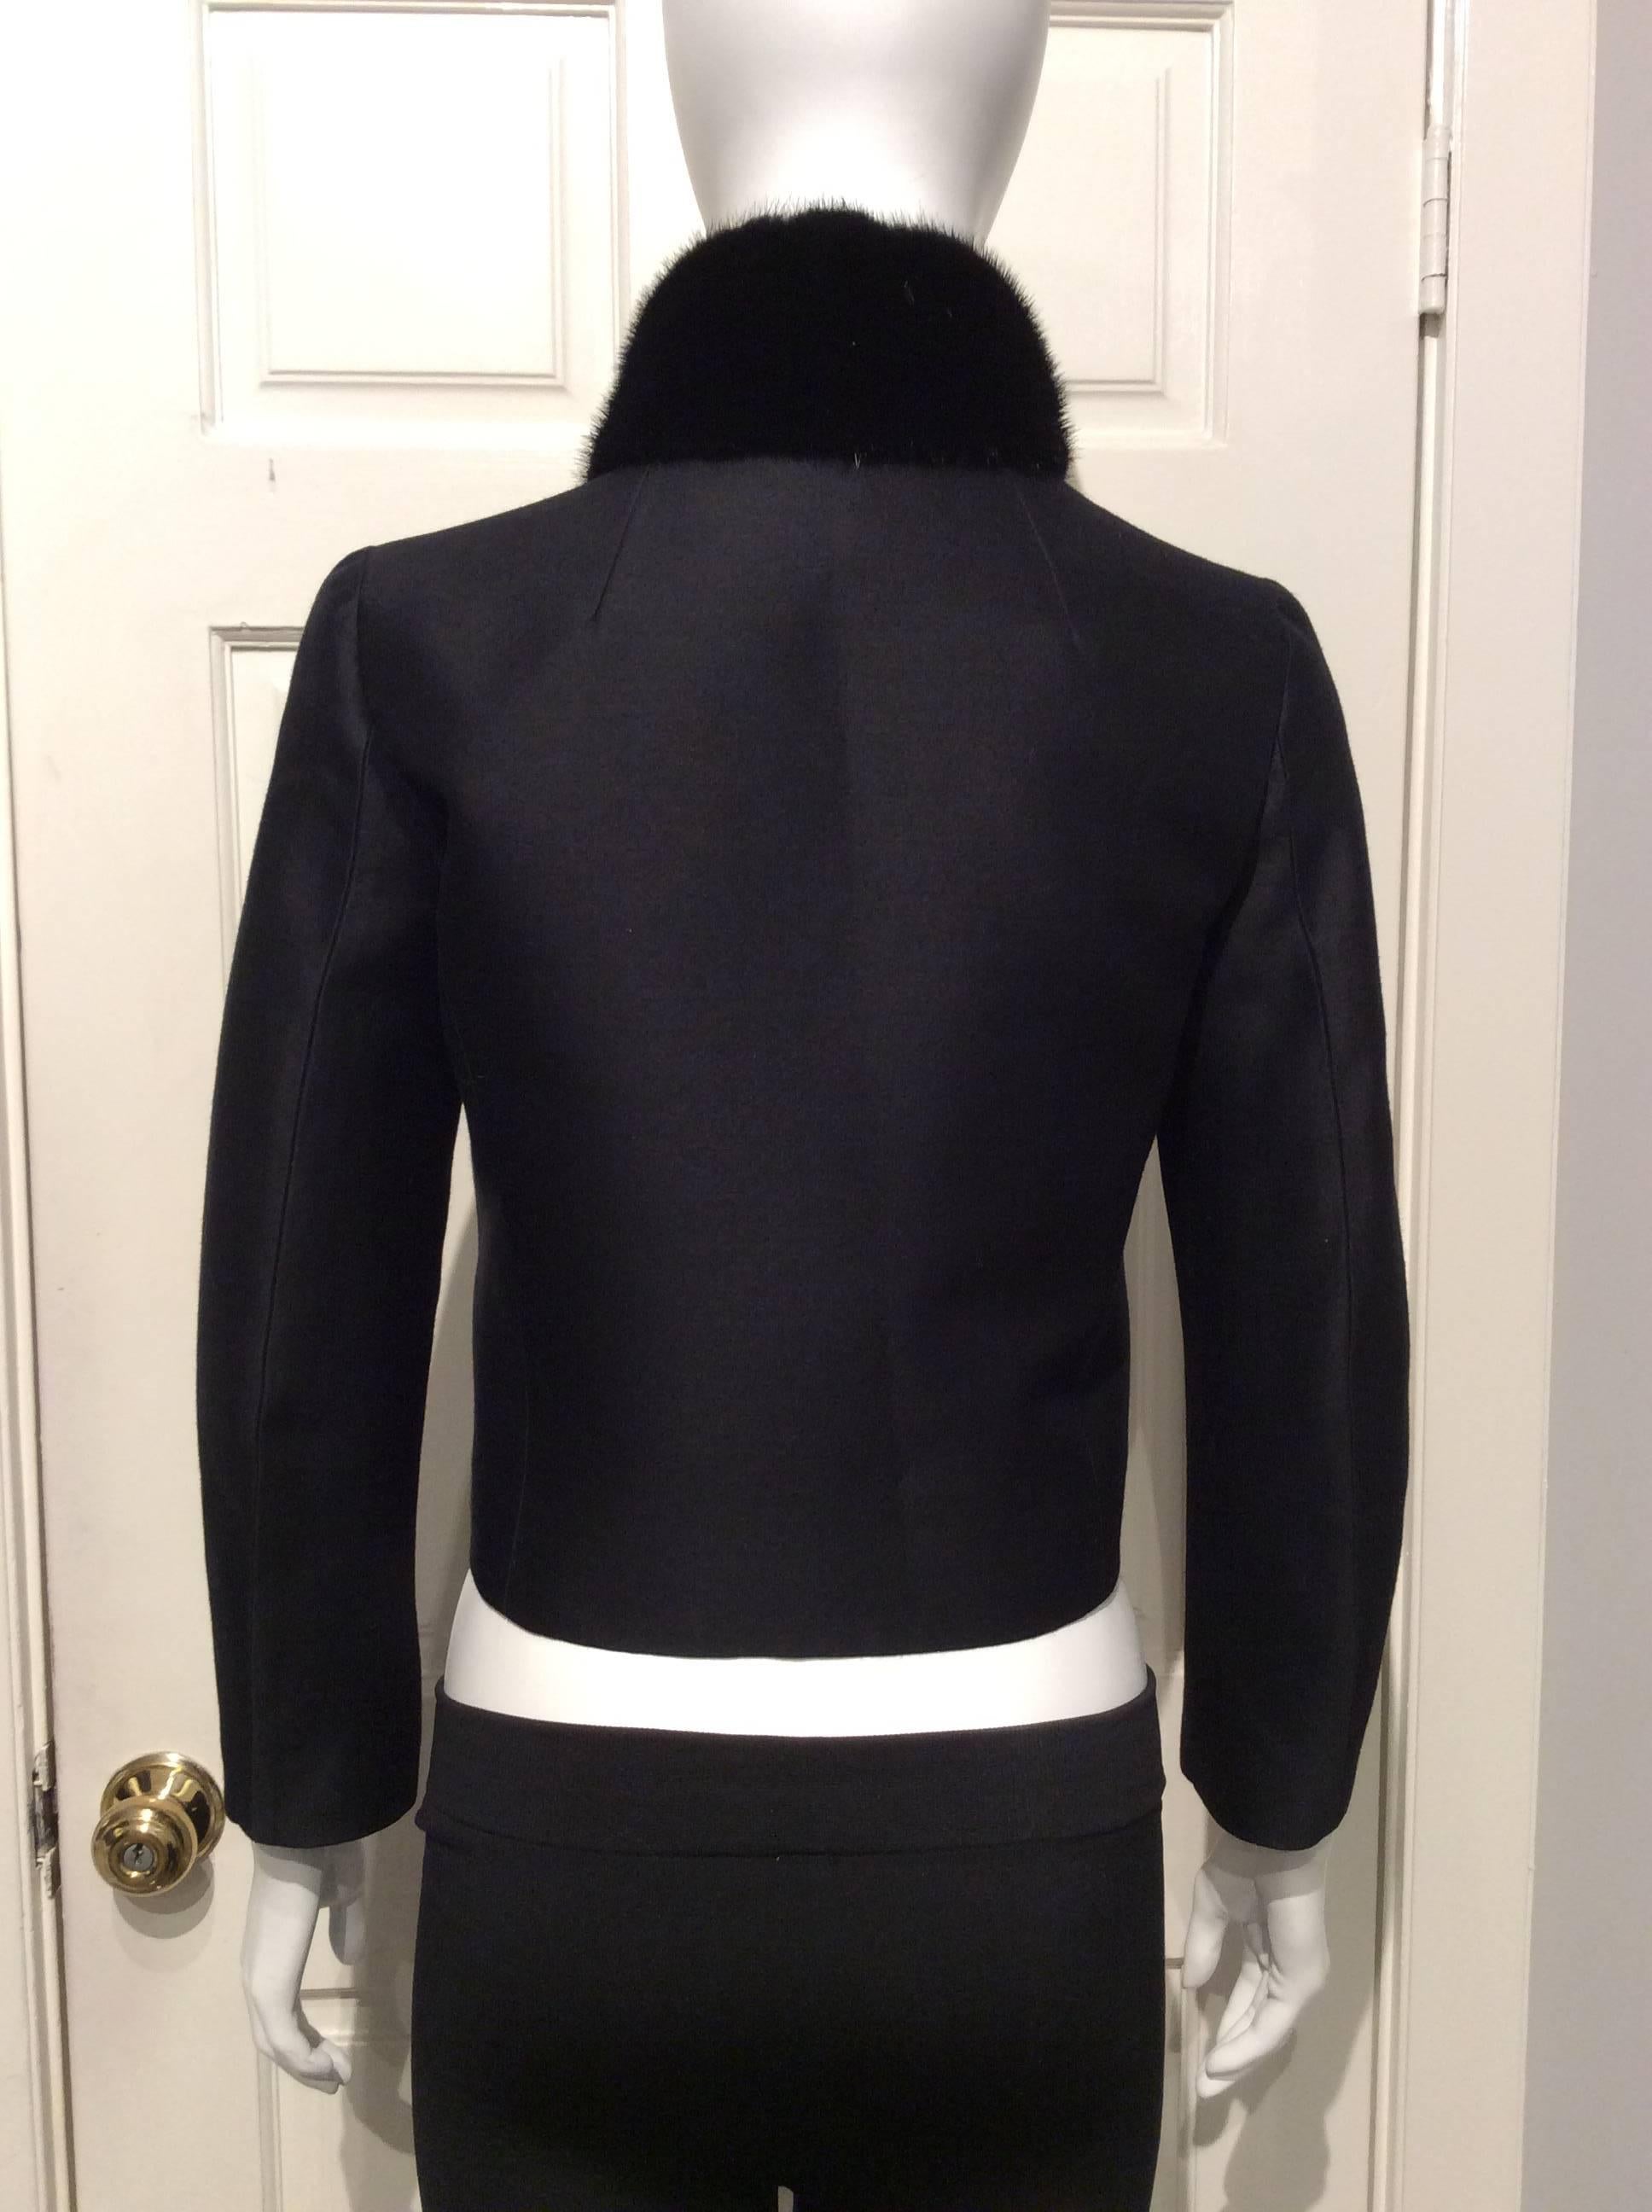 Dsquared Black Jacket With Embellished Front Panel And Mink Collar Sz 2 2